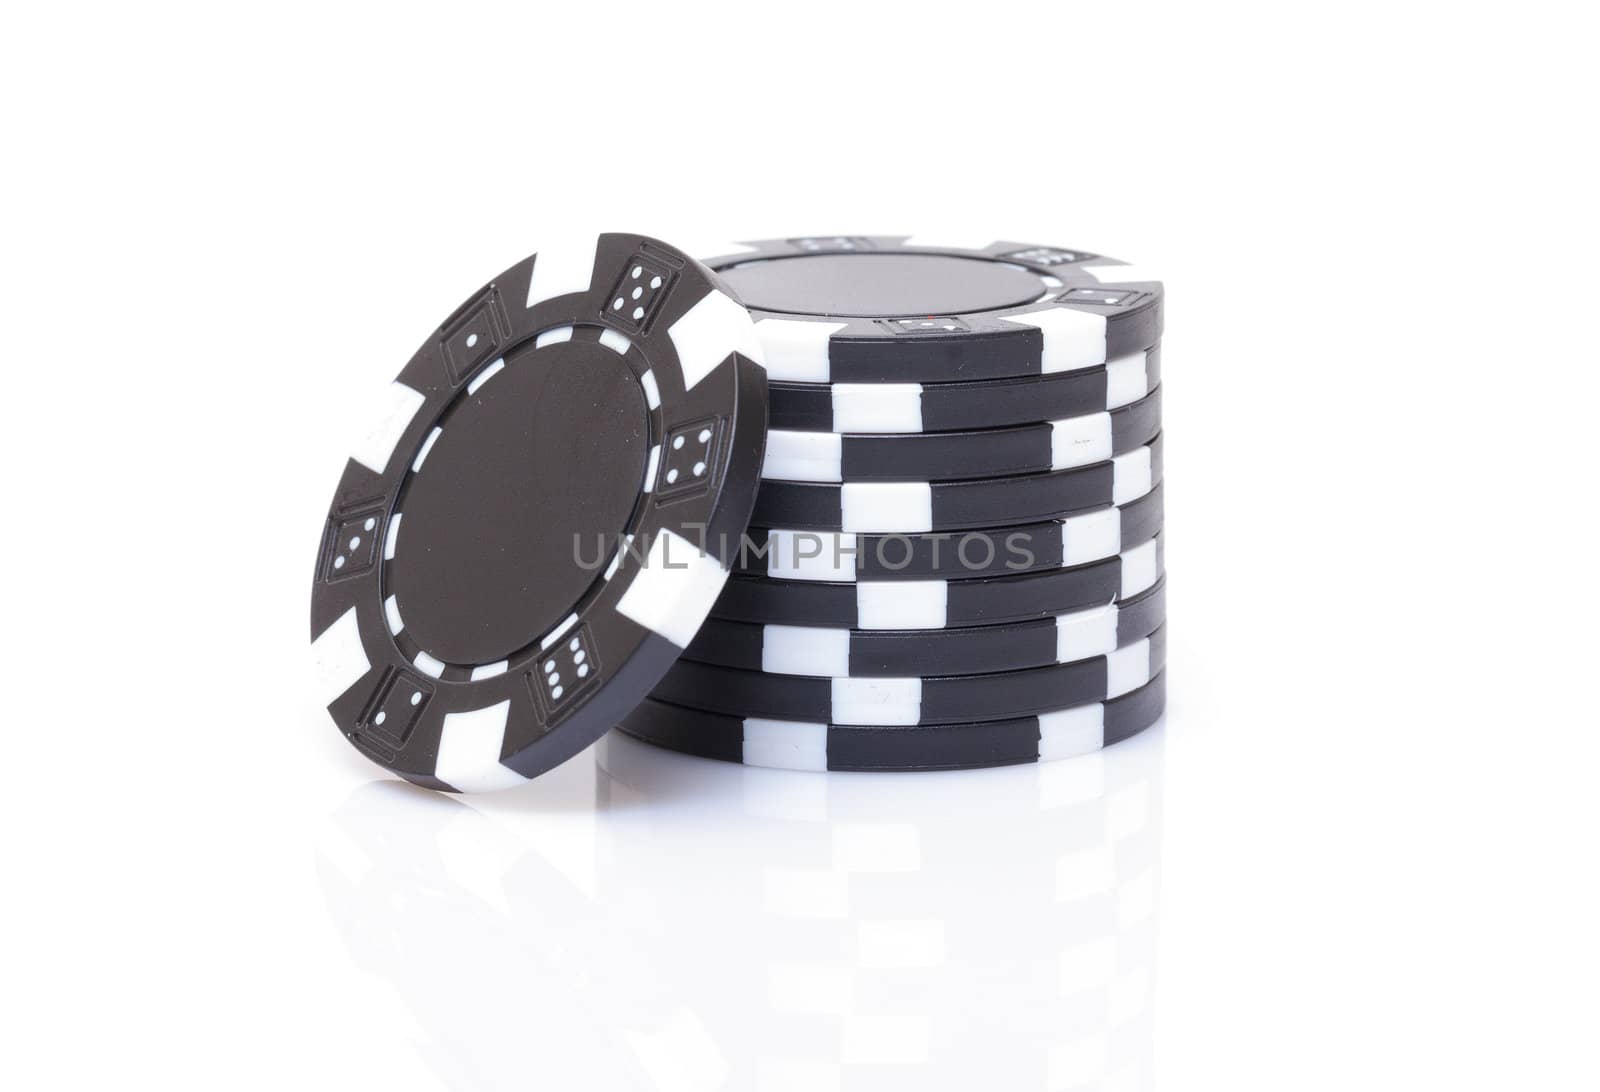 Small Stack of Black Poker Chips, closeup on white background